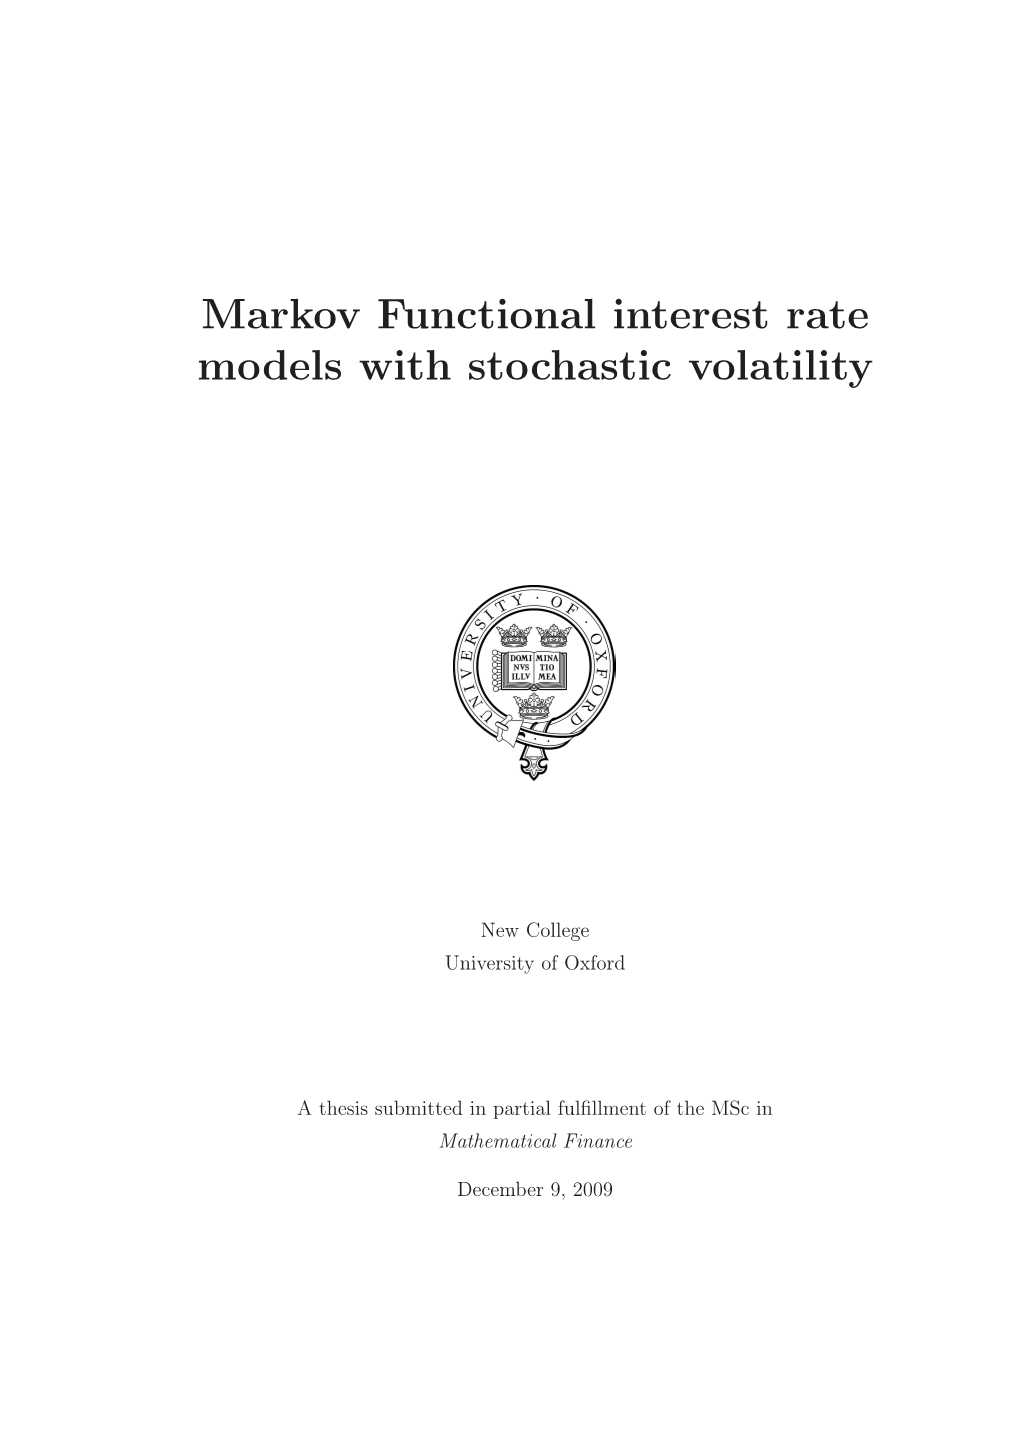 Markov Functional Interest Rate Models with Stochastic Volatility